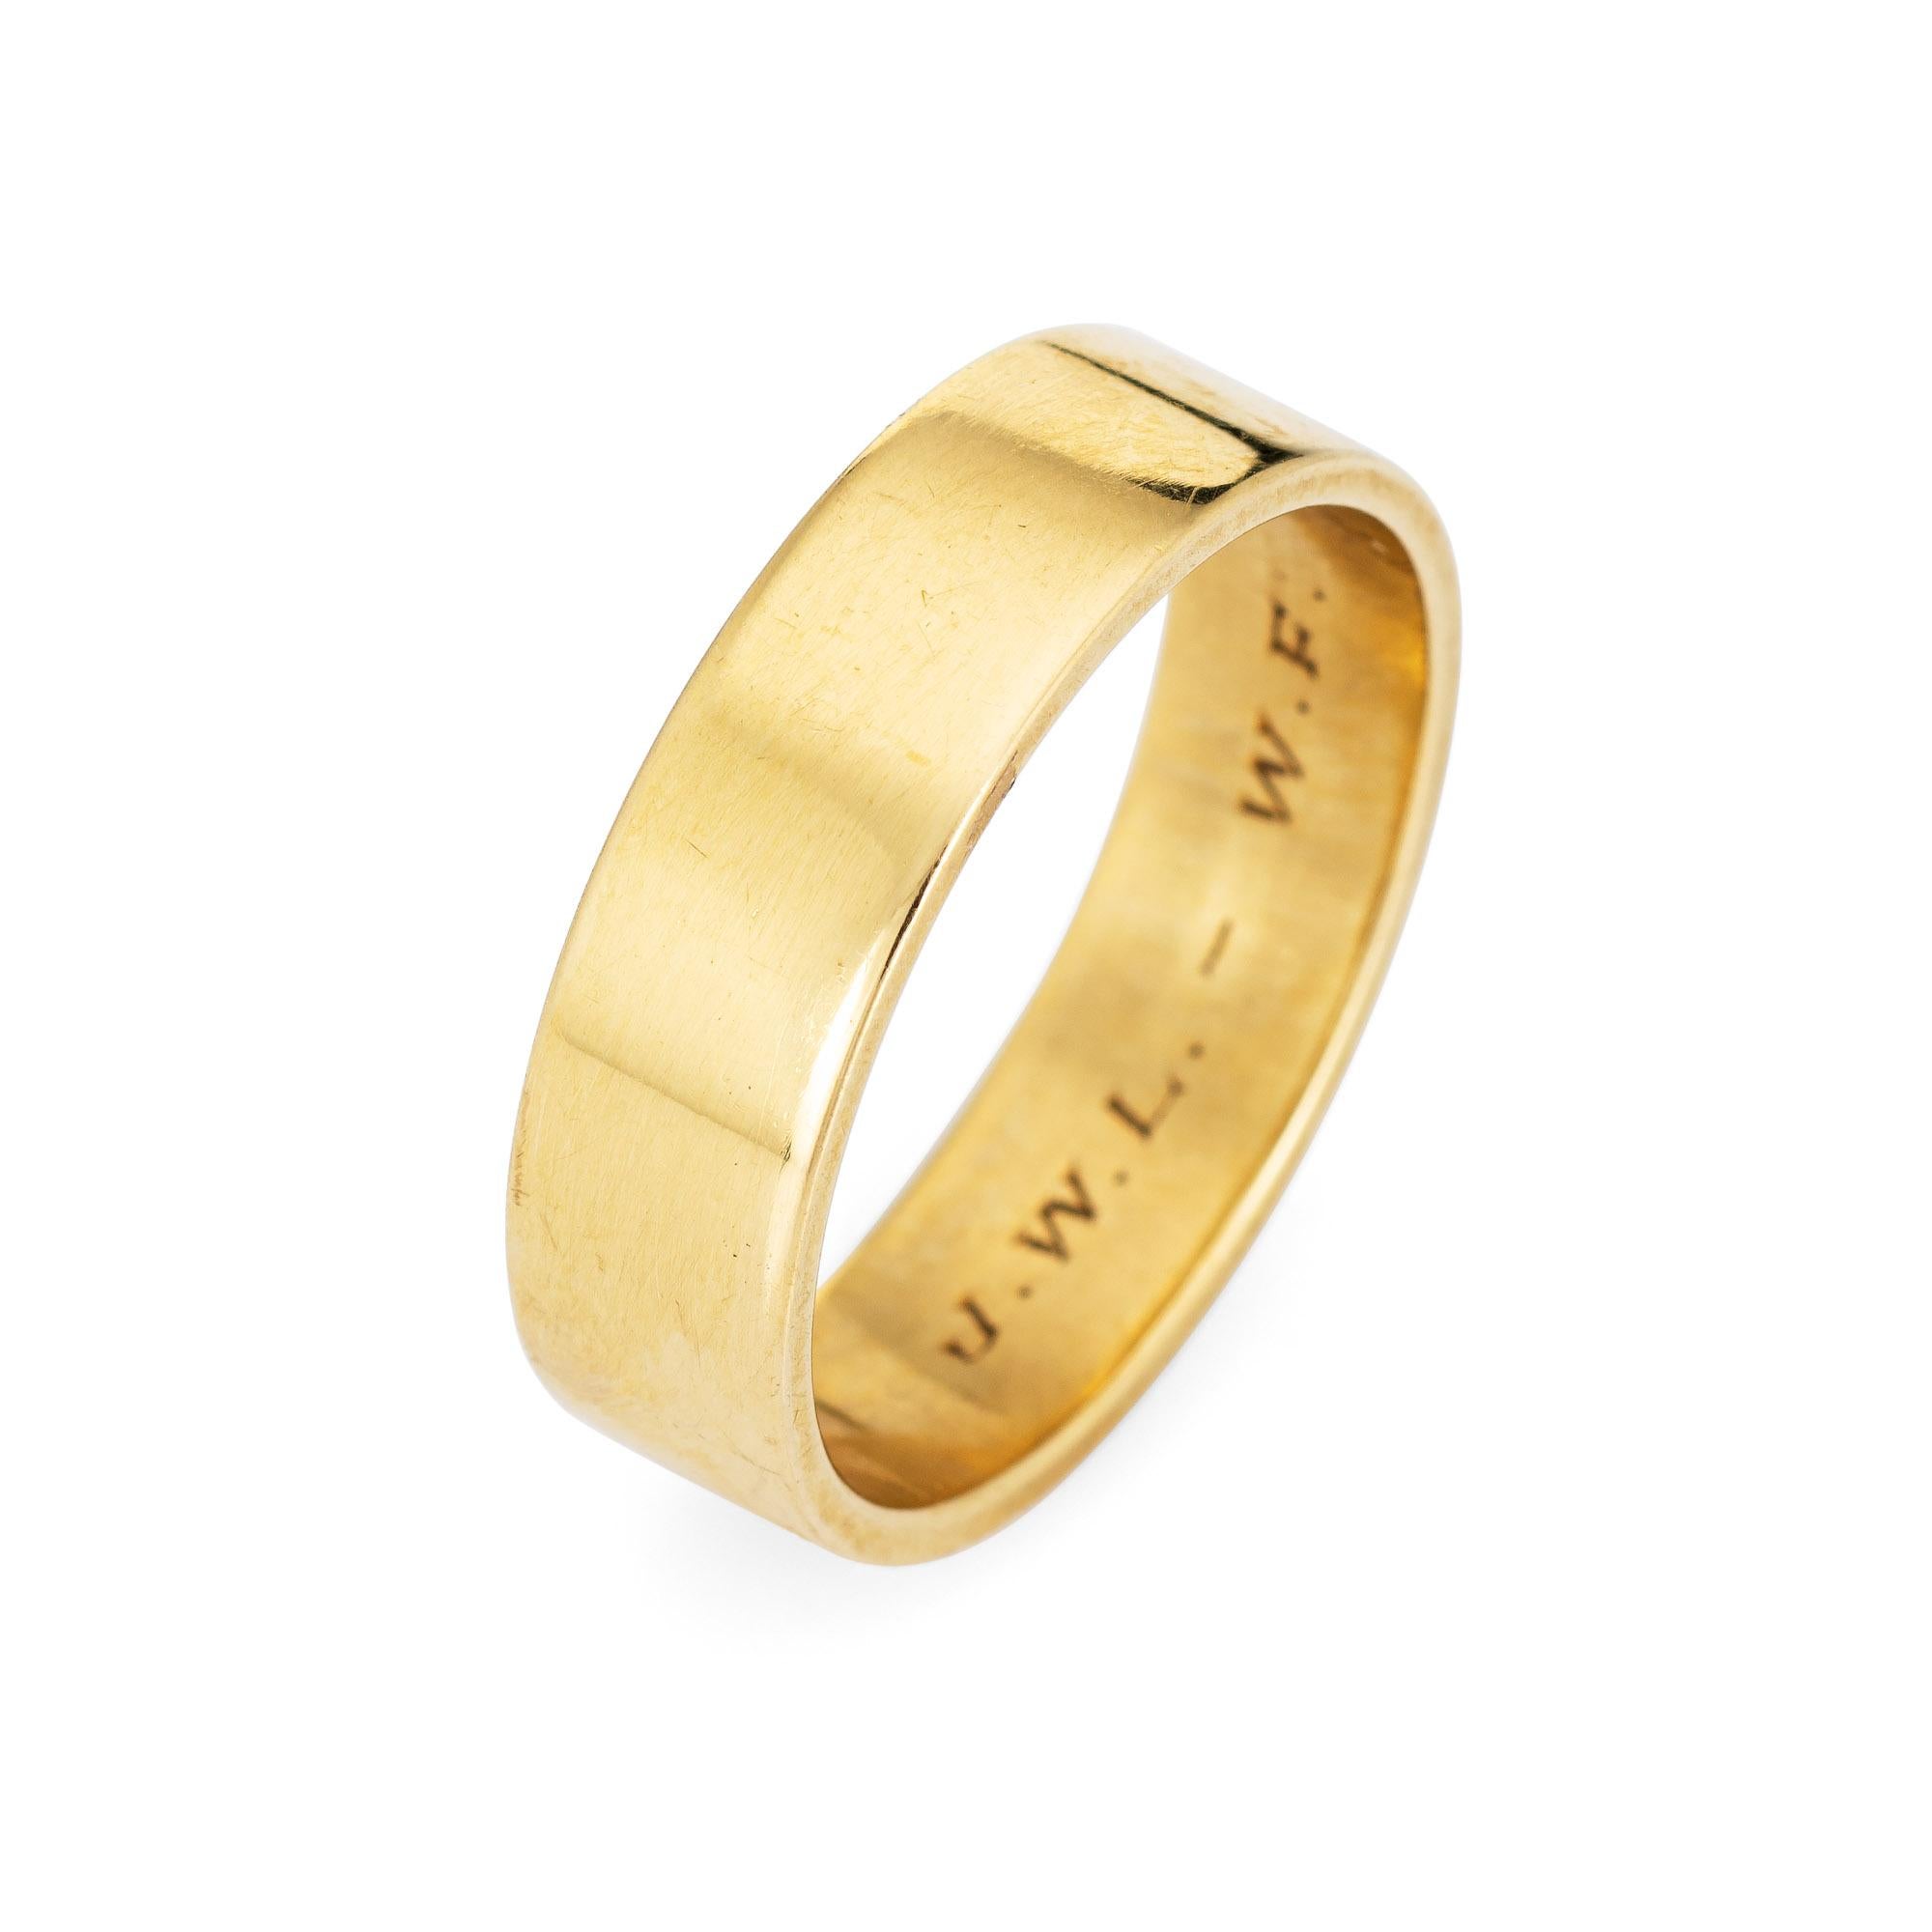 Vintage Cartier wedding band crafted in 18 karat yellow gold (circa 1935).  

The classic wedding band is wider in scale measuring 6mm wide (0.23 inches). The inner band is engraved 